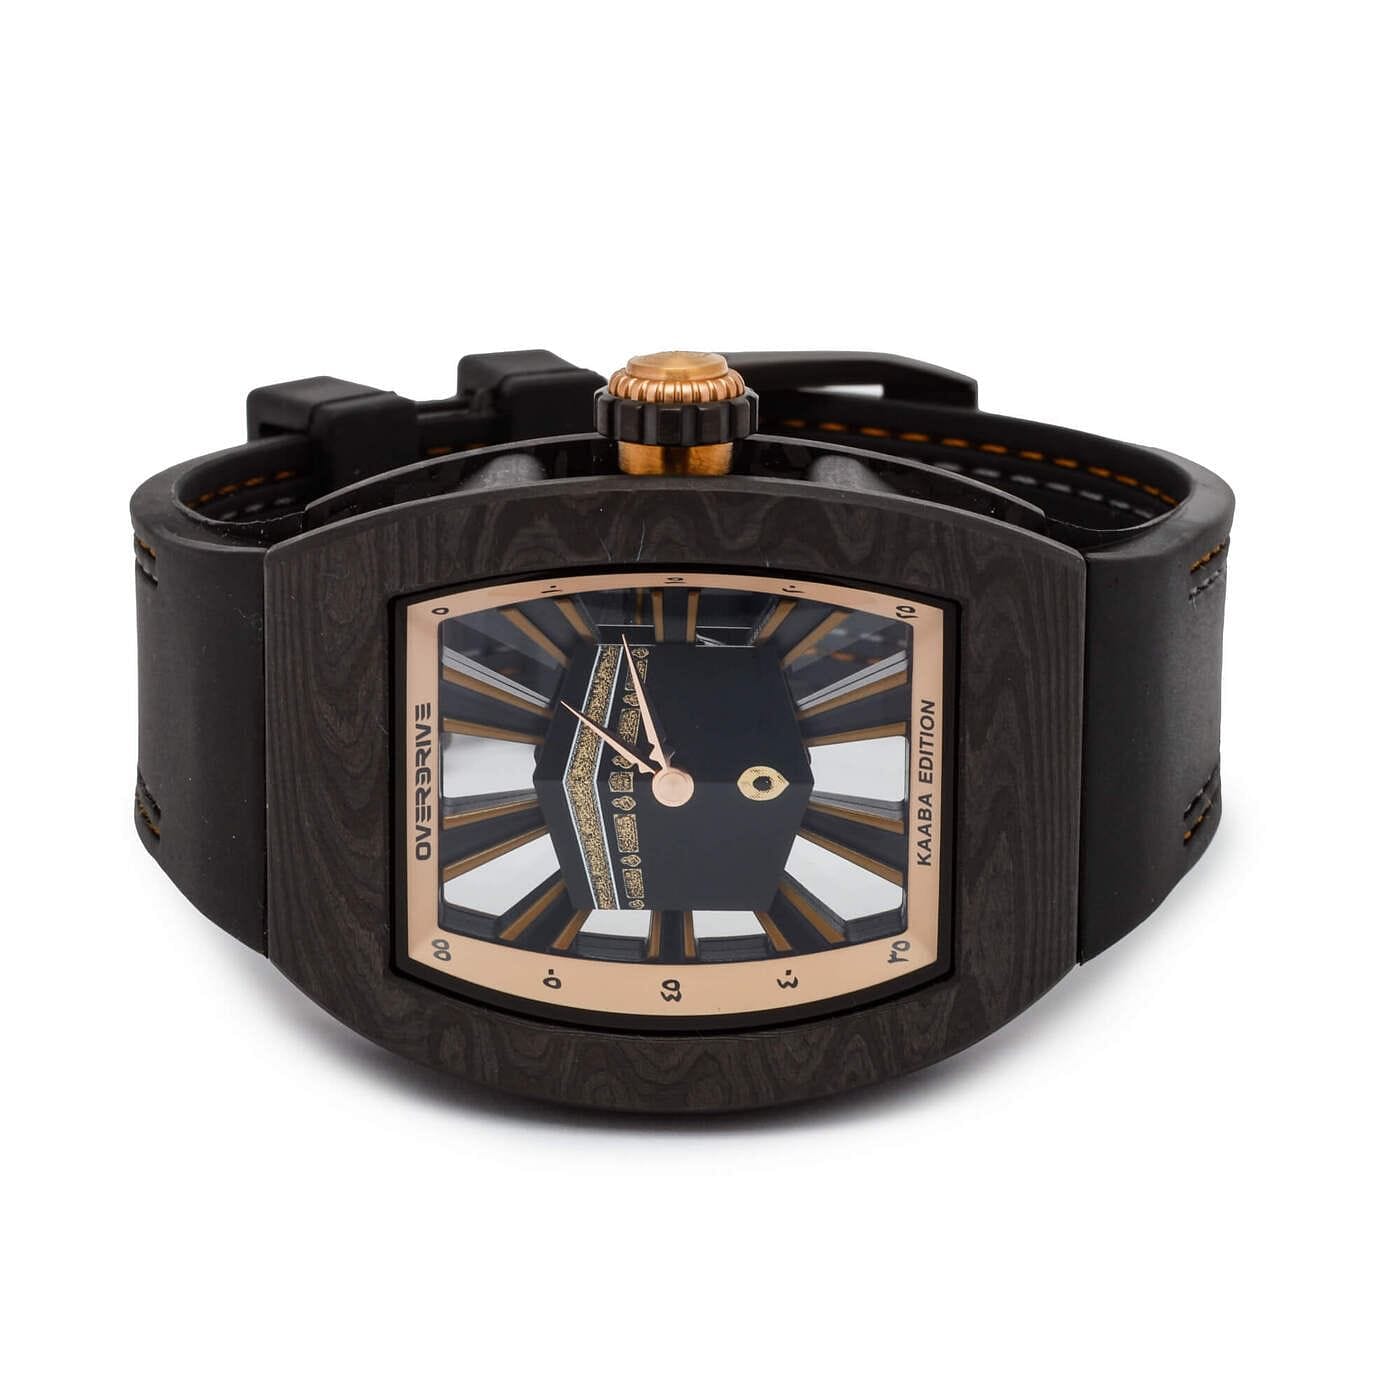 overdrive-kaaba-limited-edition-men-s-watch